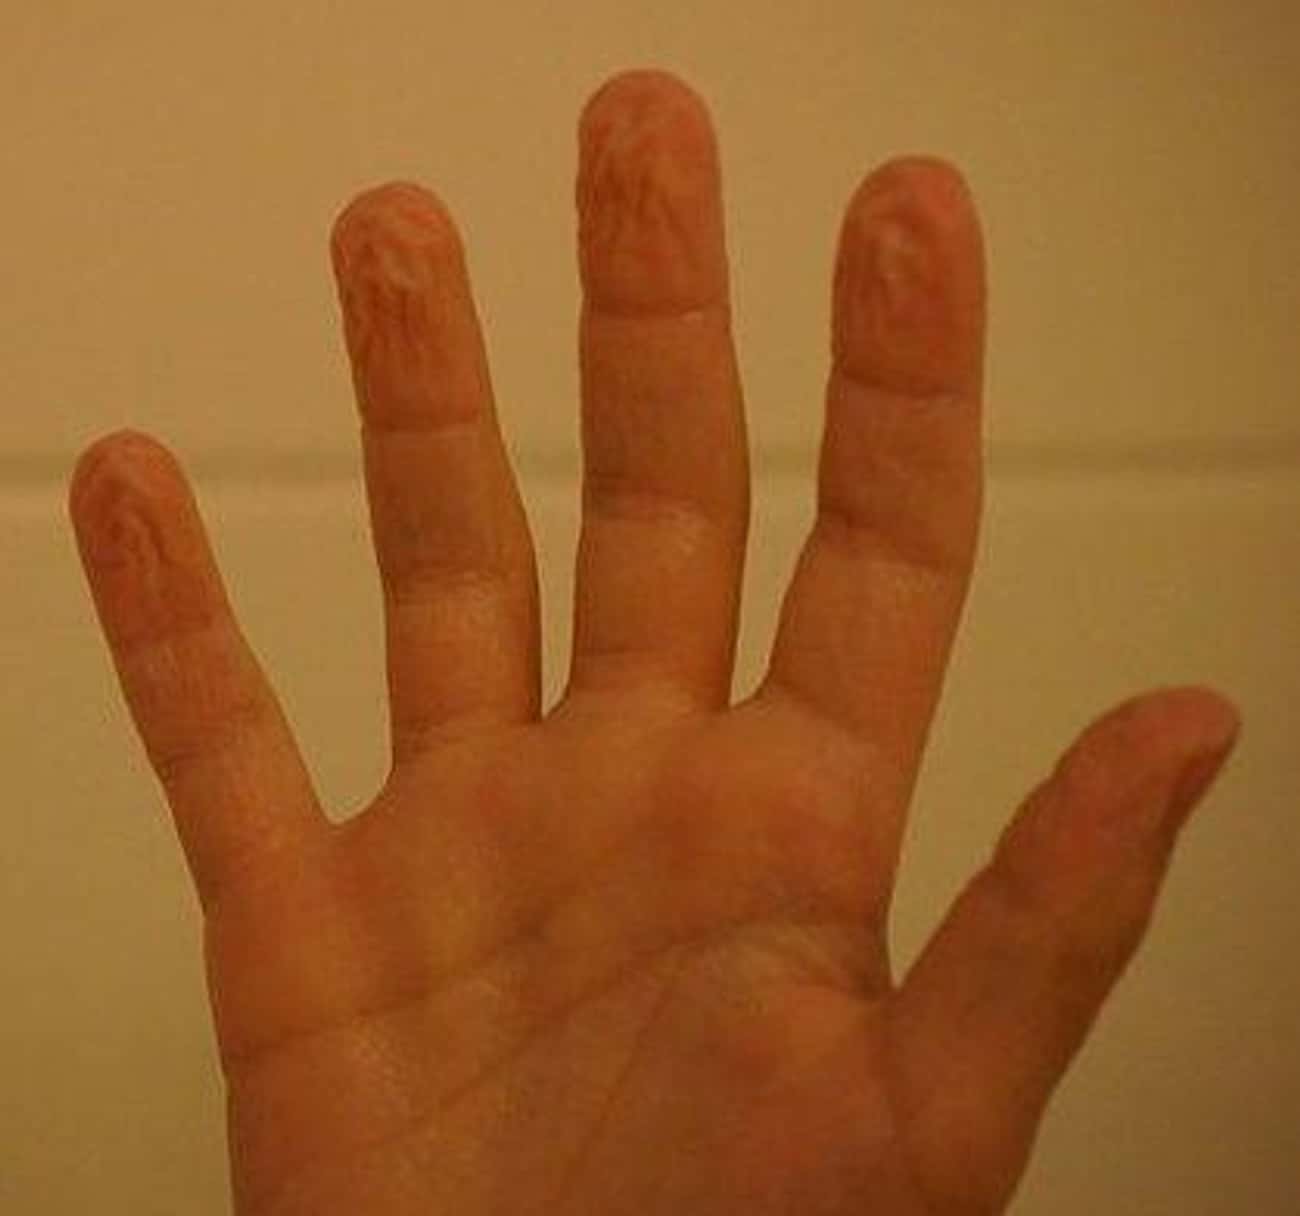 Fingers And Toes Don't Get Wrinkly From Absorbing Water; It's A Nerve Reflex